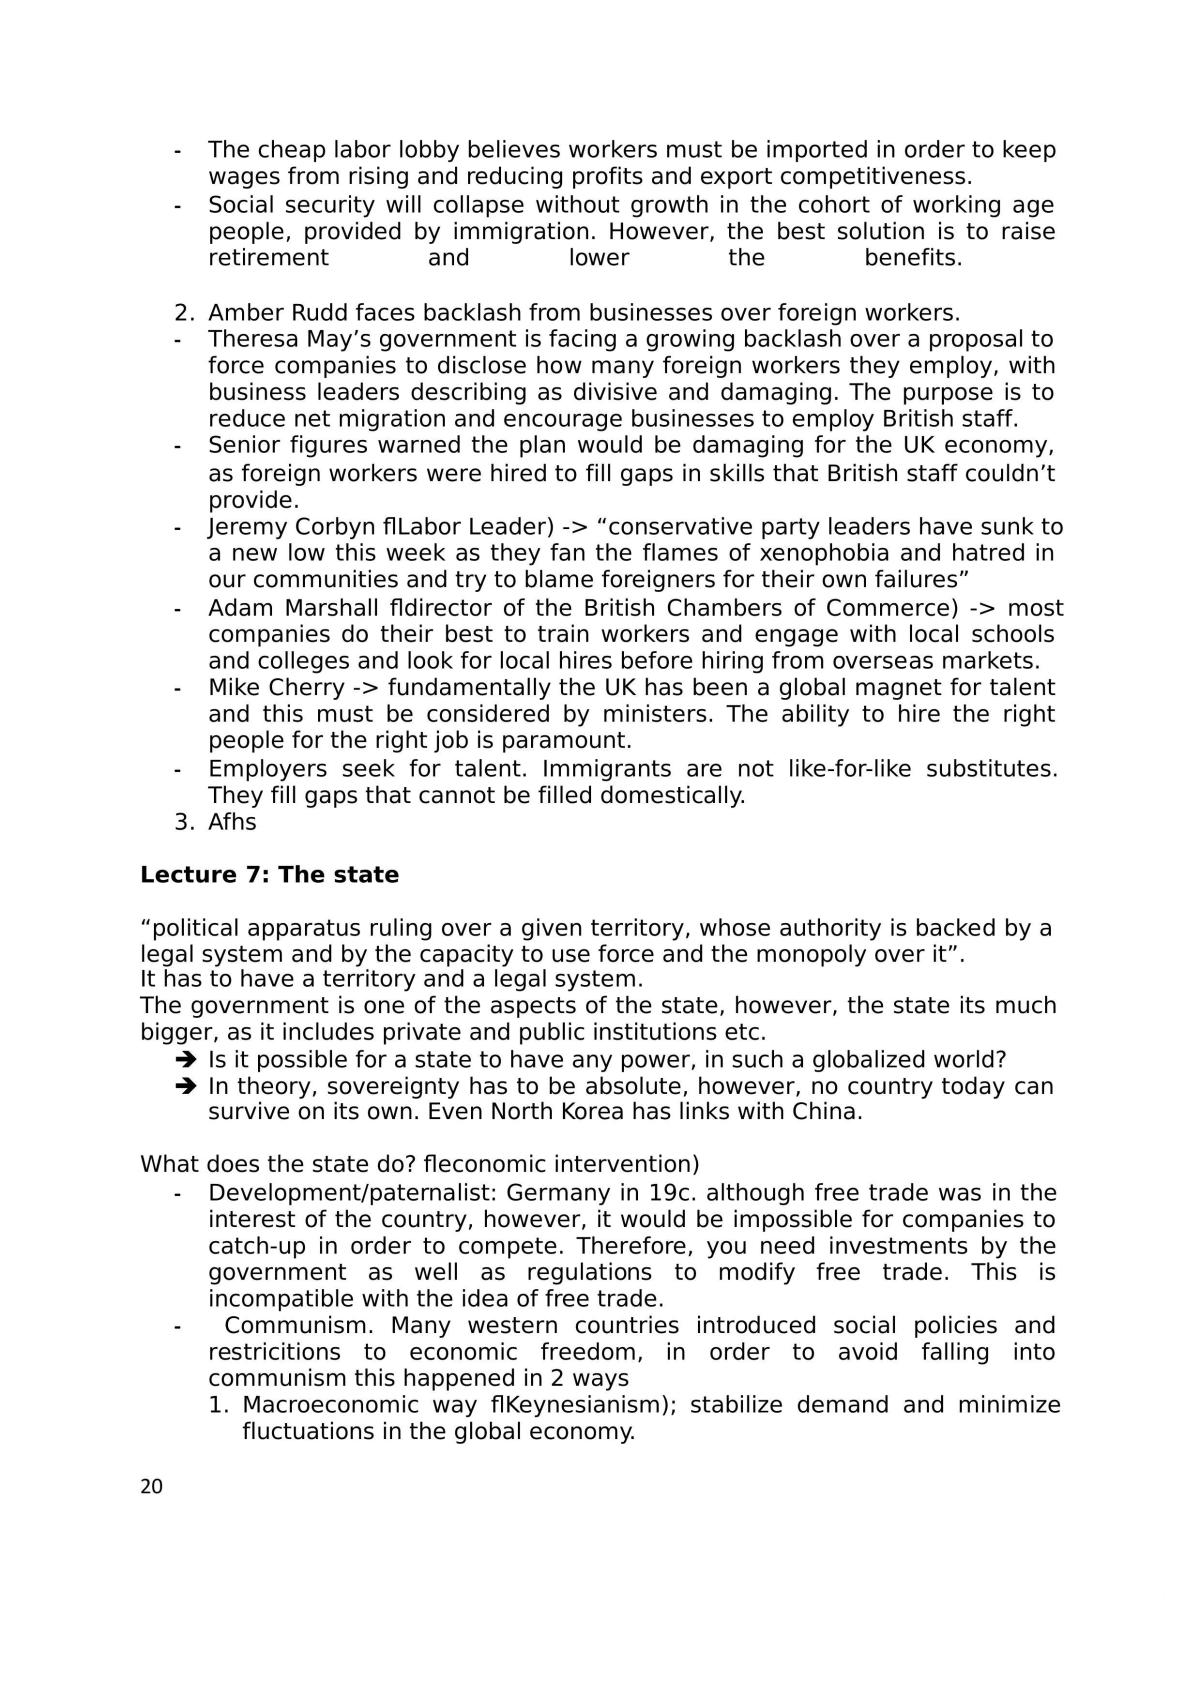 Global Environment of Business Exam Notes - Page 20